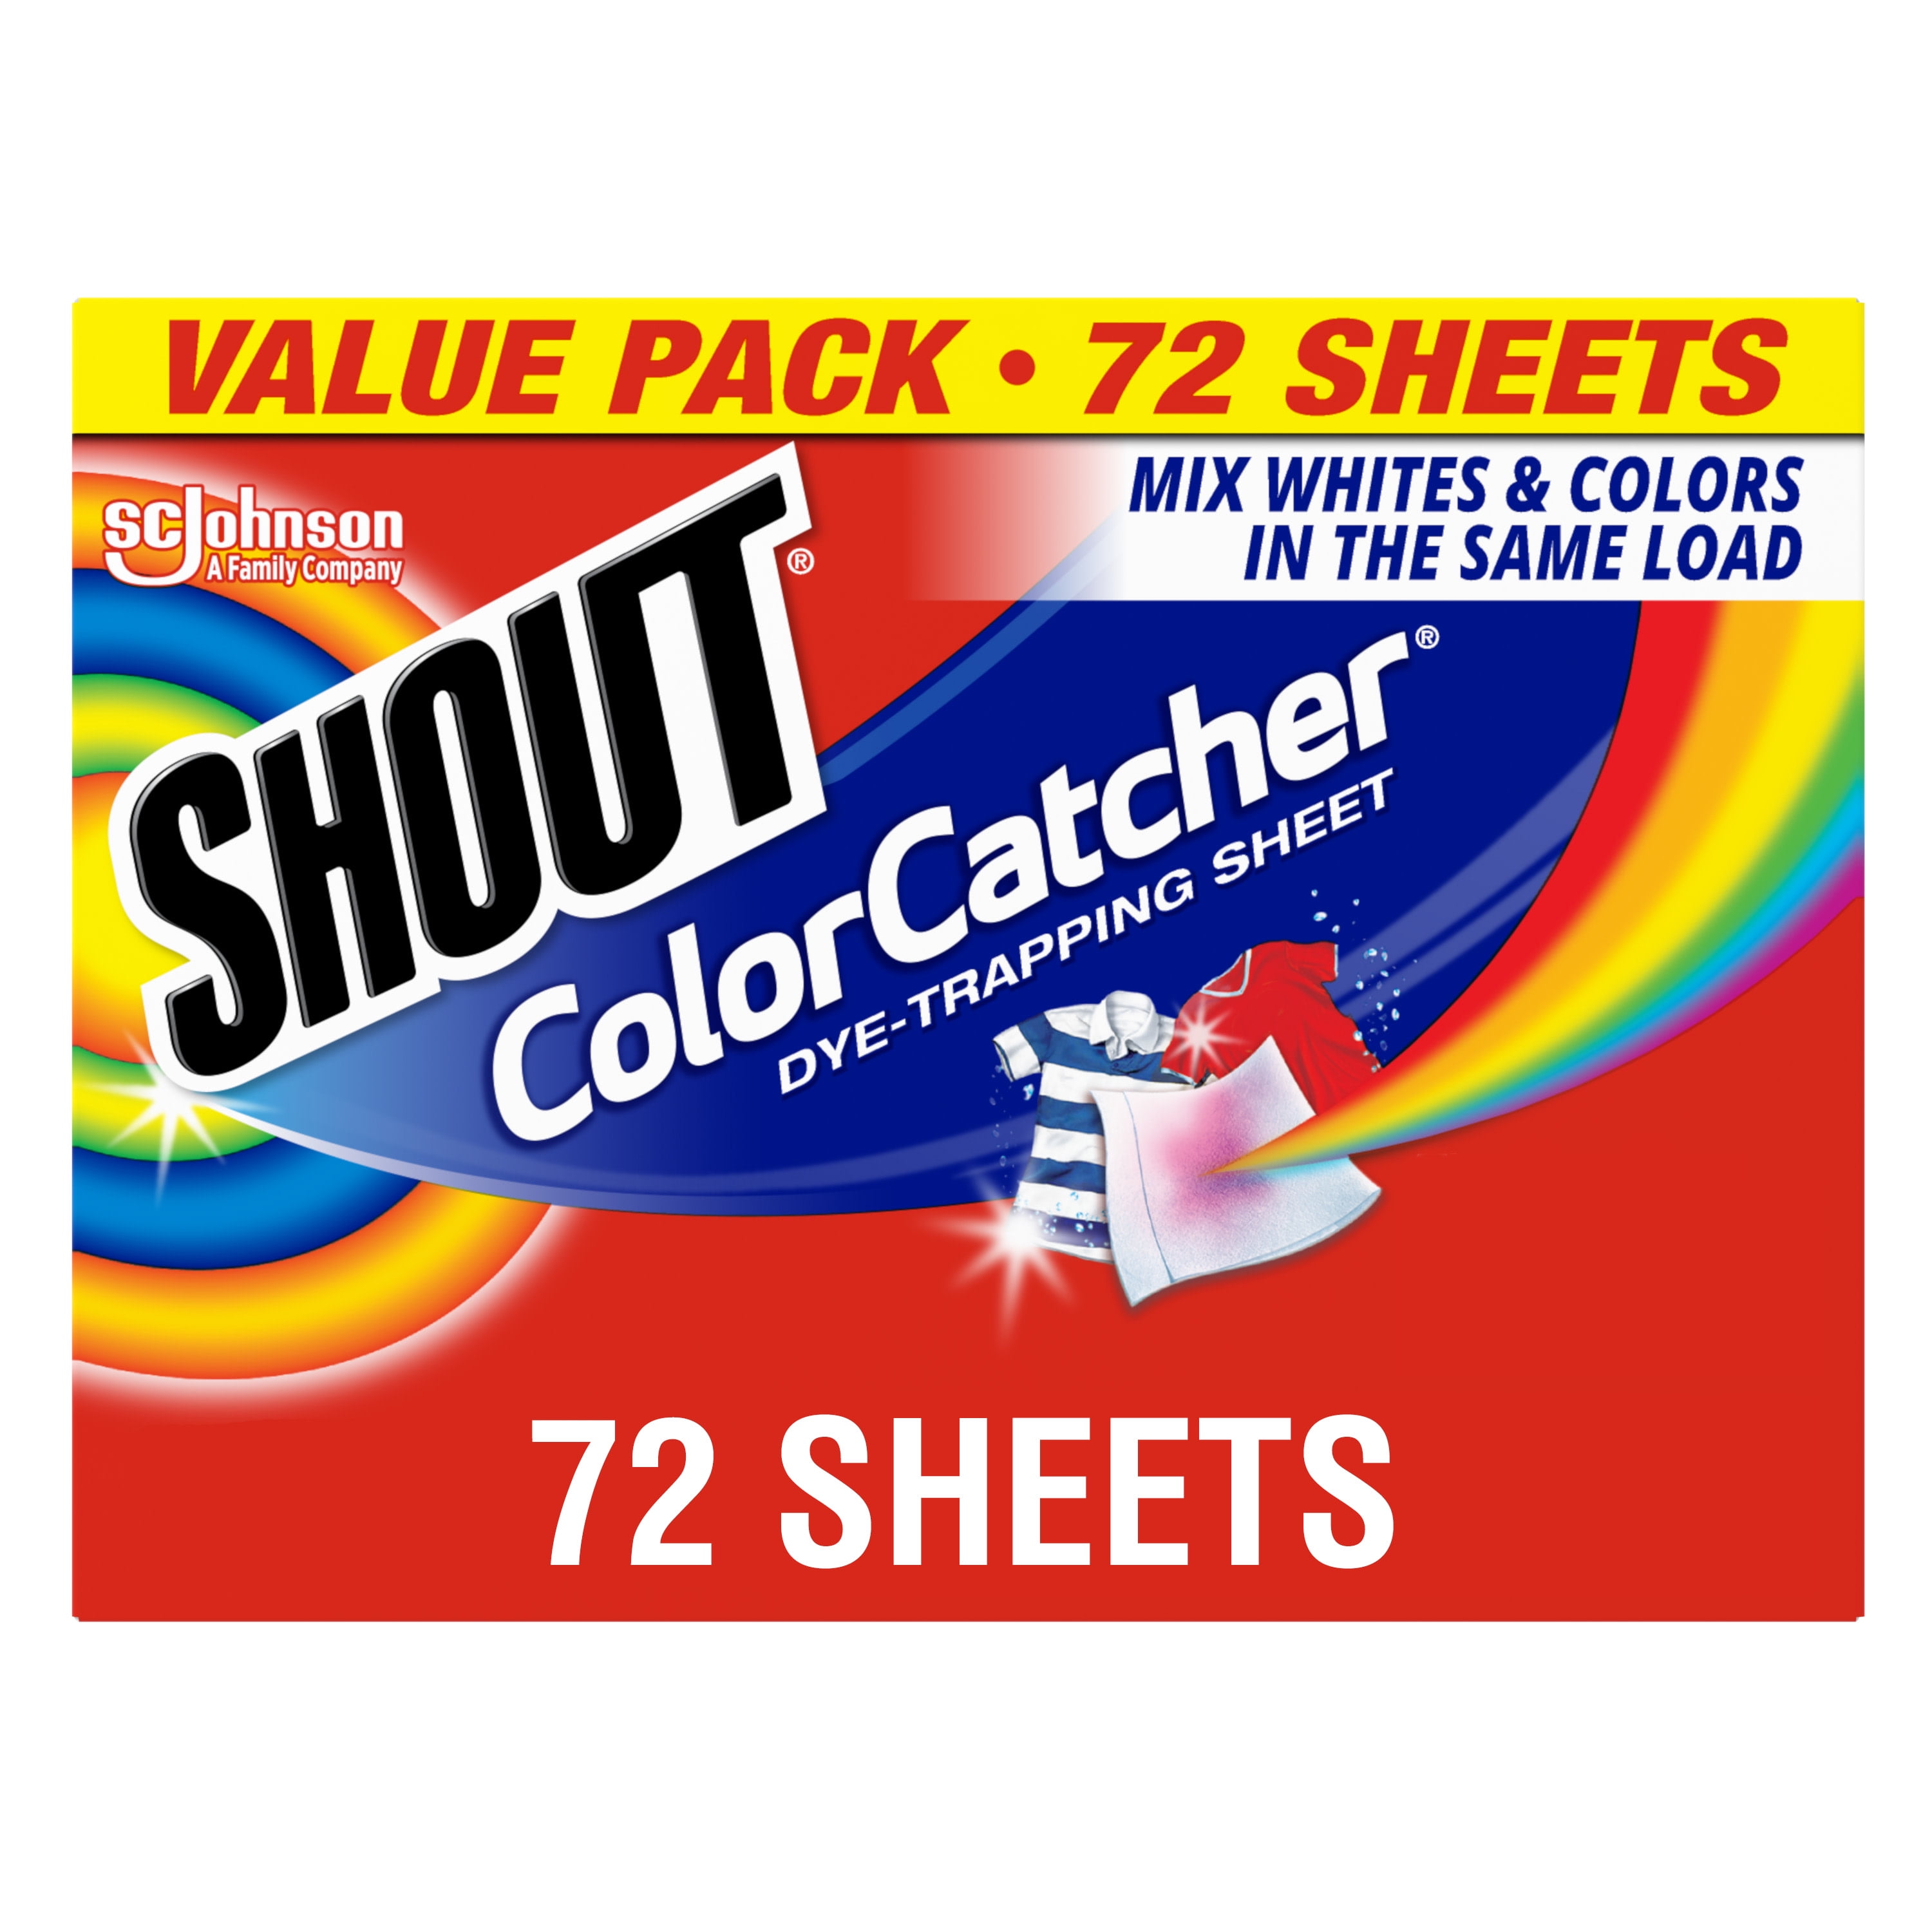 Shout ColorCatcher Dye-Trapping Sheet, In-Wash, Value Pack - 72 sheets